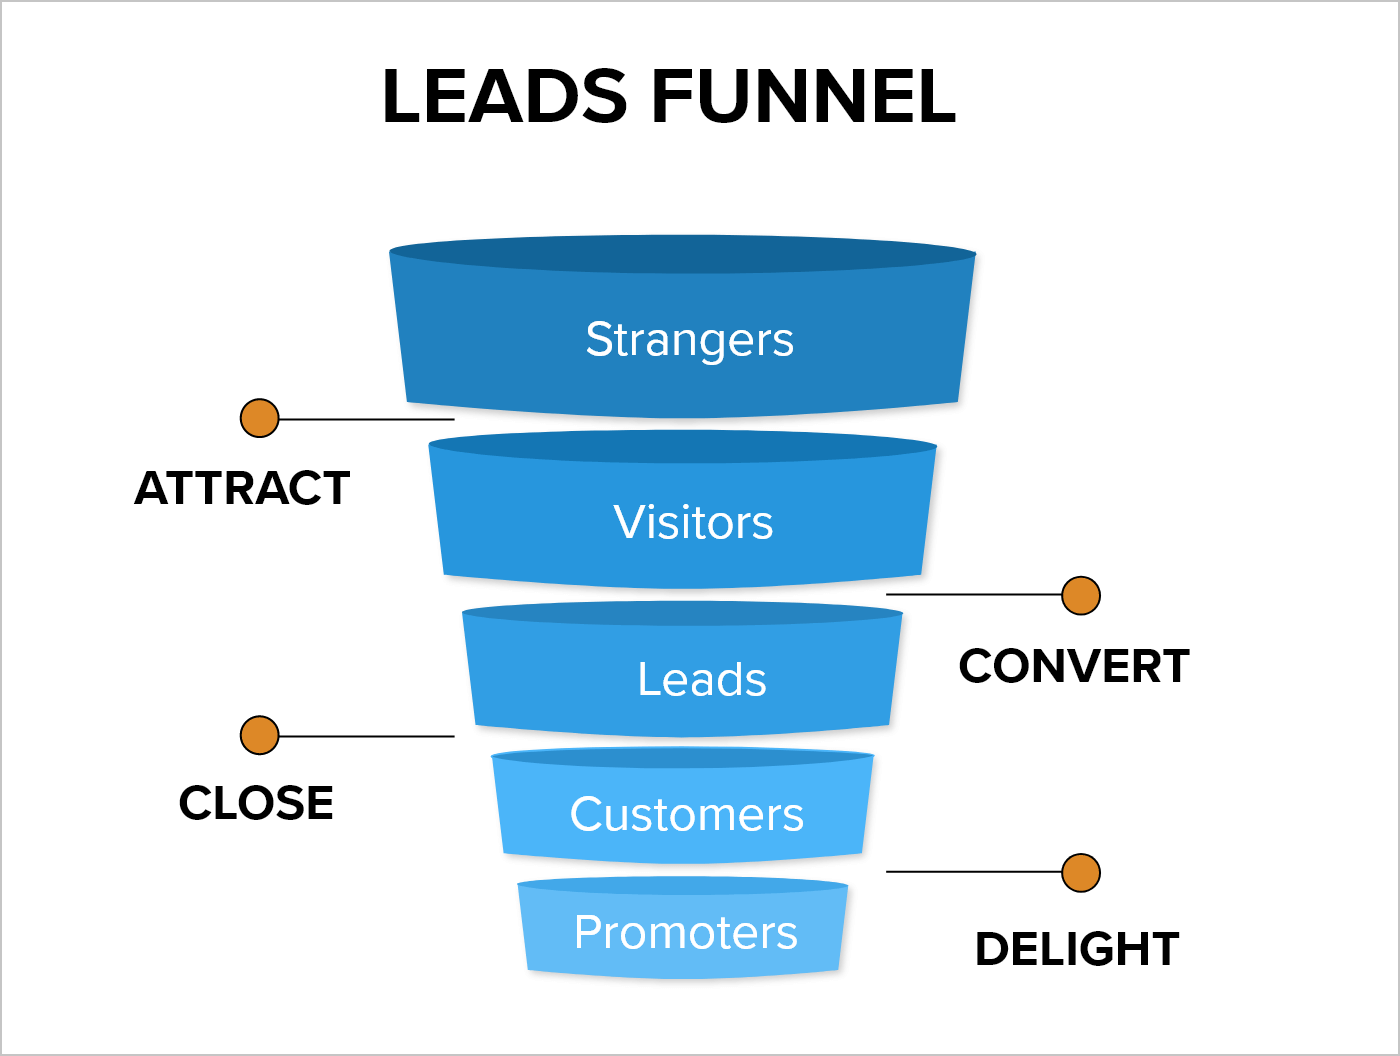 Are You Successfully Converting Leads?